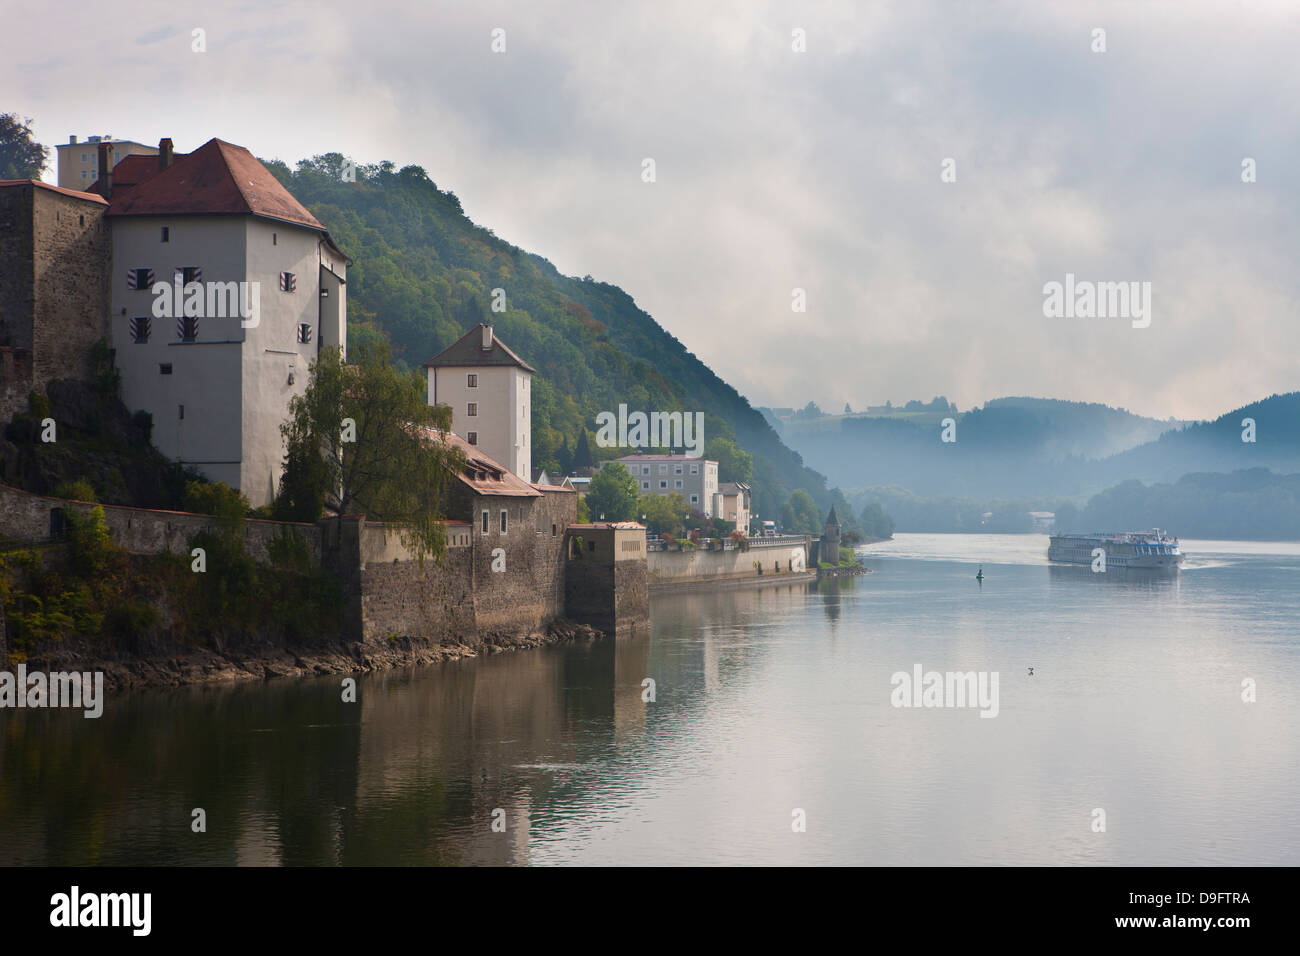 Cruise ship passing on the River Danube in the early morning mist, Passau, Bavaria, Germany Stock Photo